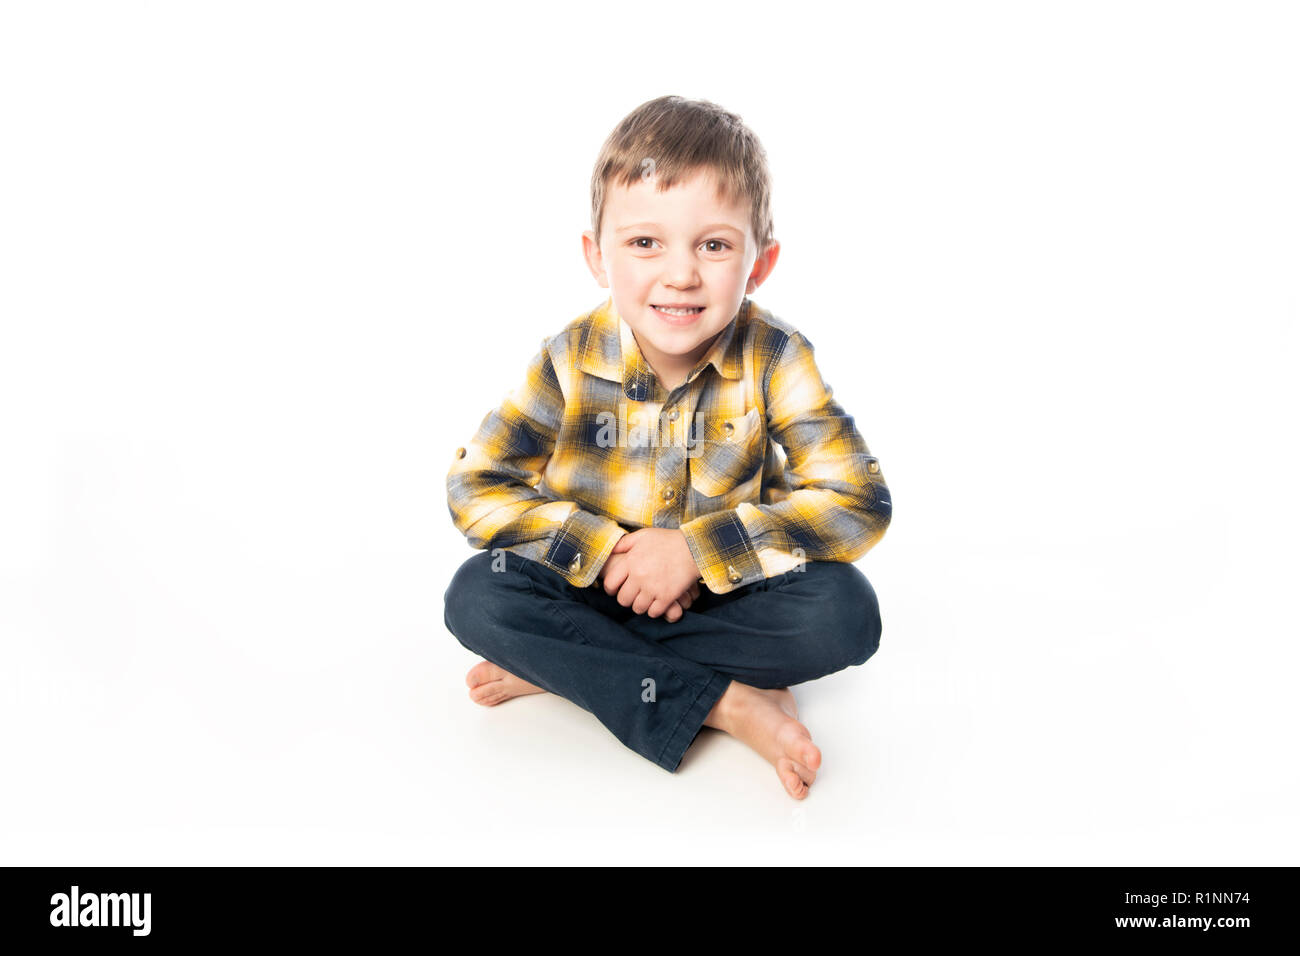 A boy shot in the studio on a white background. Stock Photo